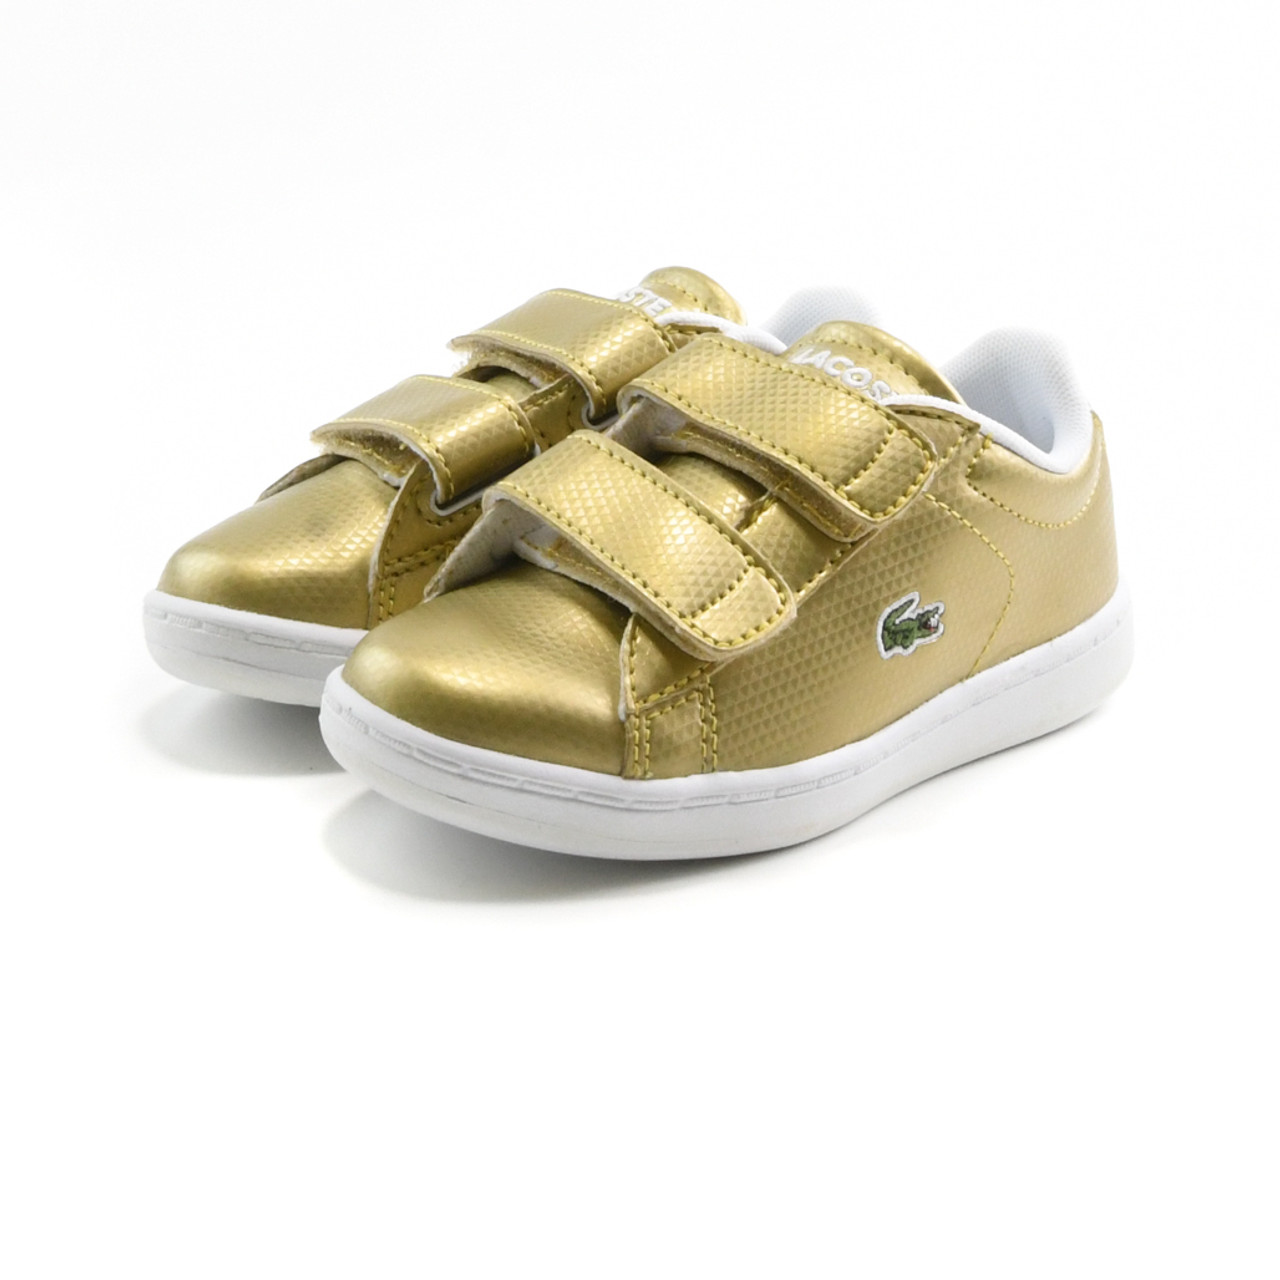 LACOSTE Carnaby Evo "Golden Runner" Gold for Boys and Baby Collection | Hera + Hermes